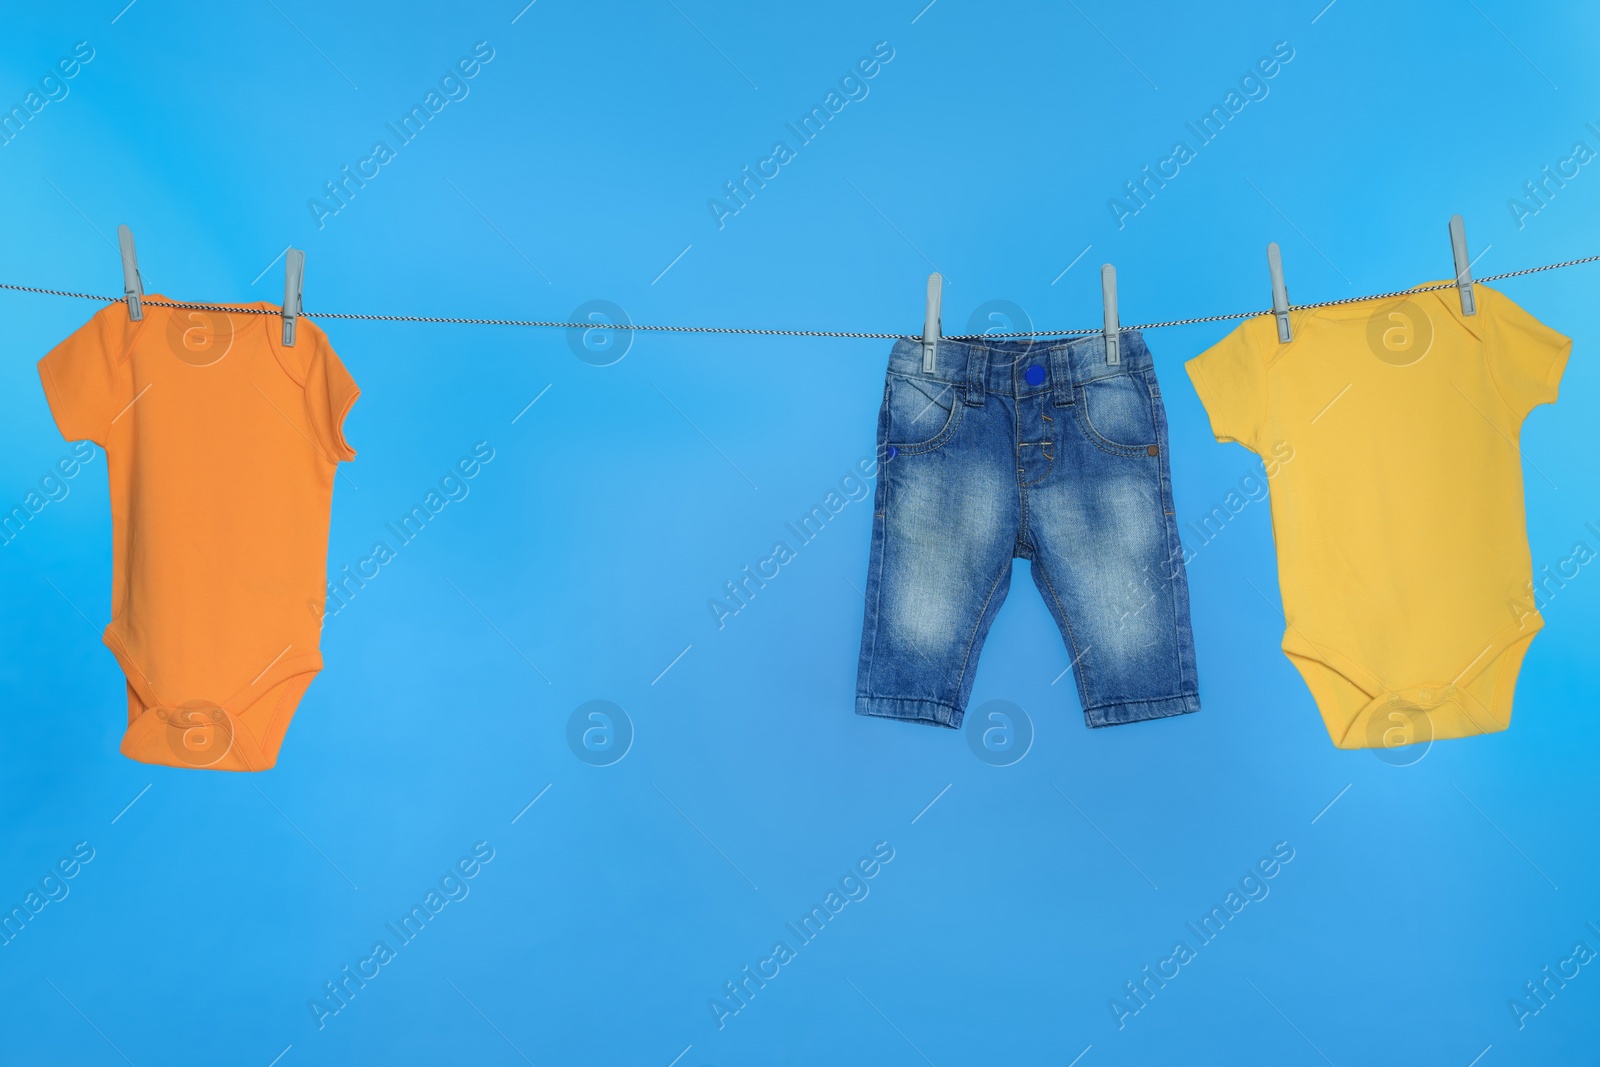 Photo of Different baby clothes drying on laundry line against light blue background